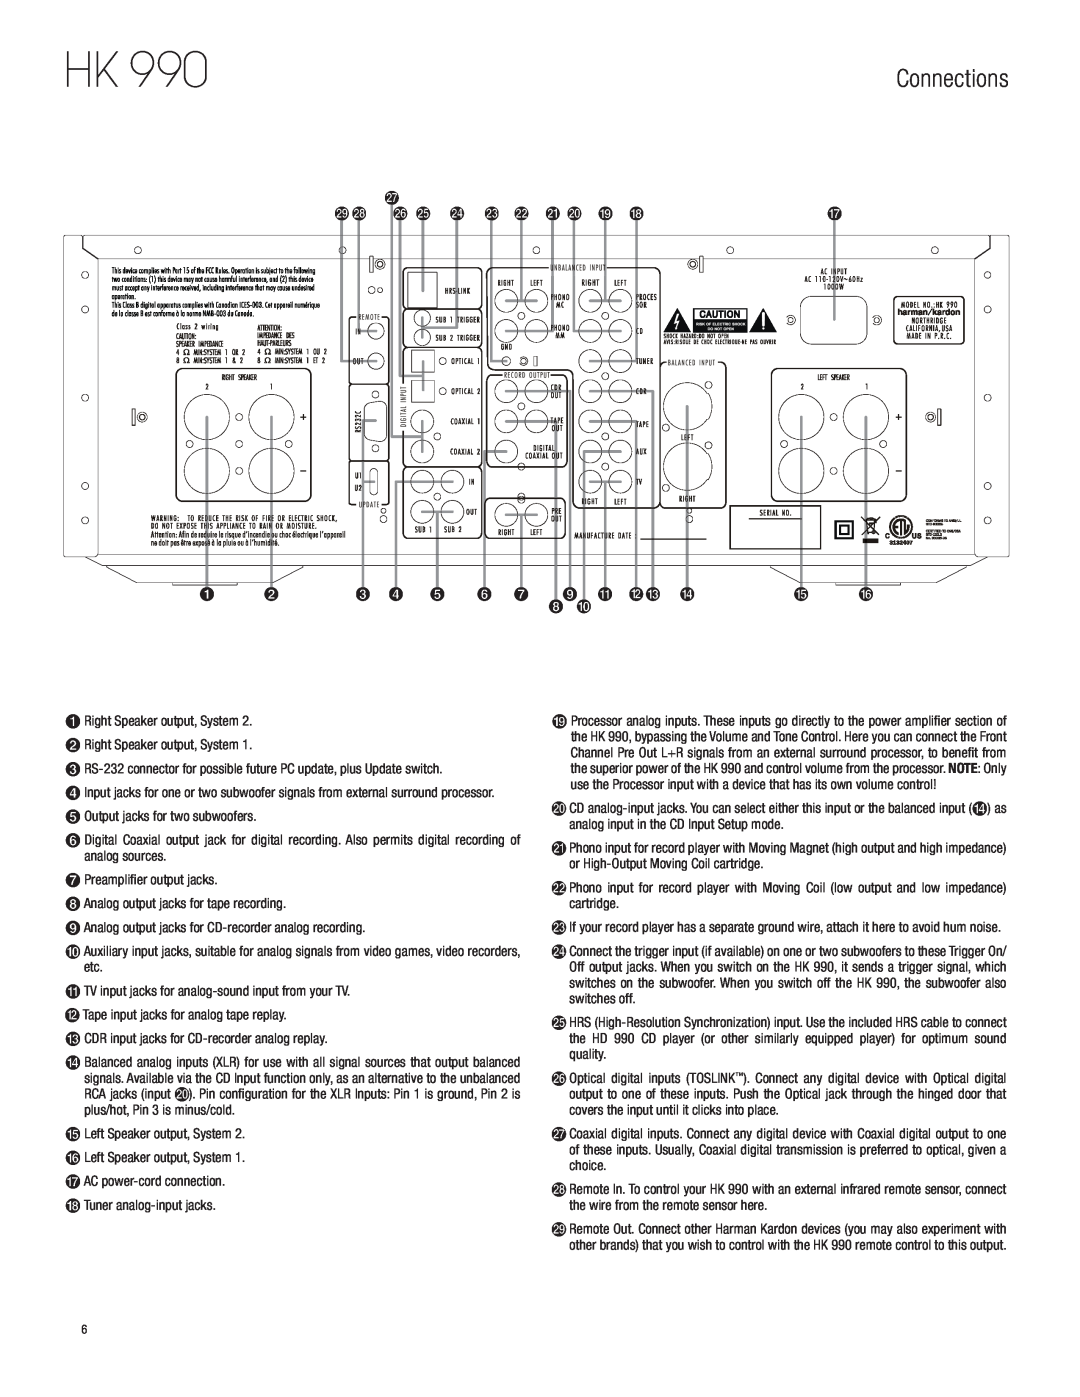 Harman HK 990 owner manual Connections 